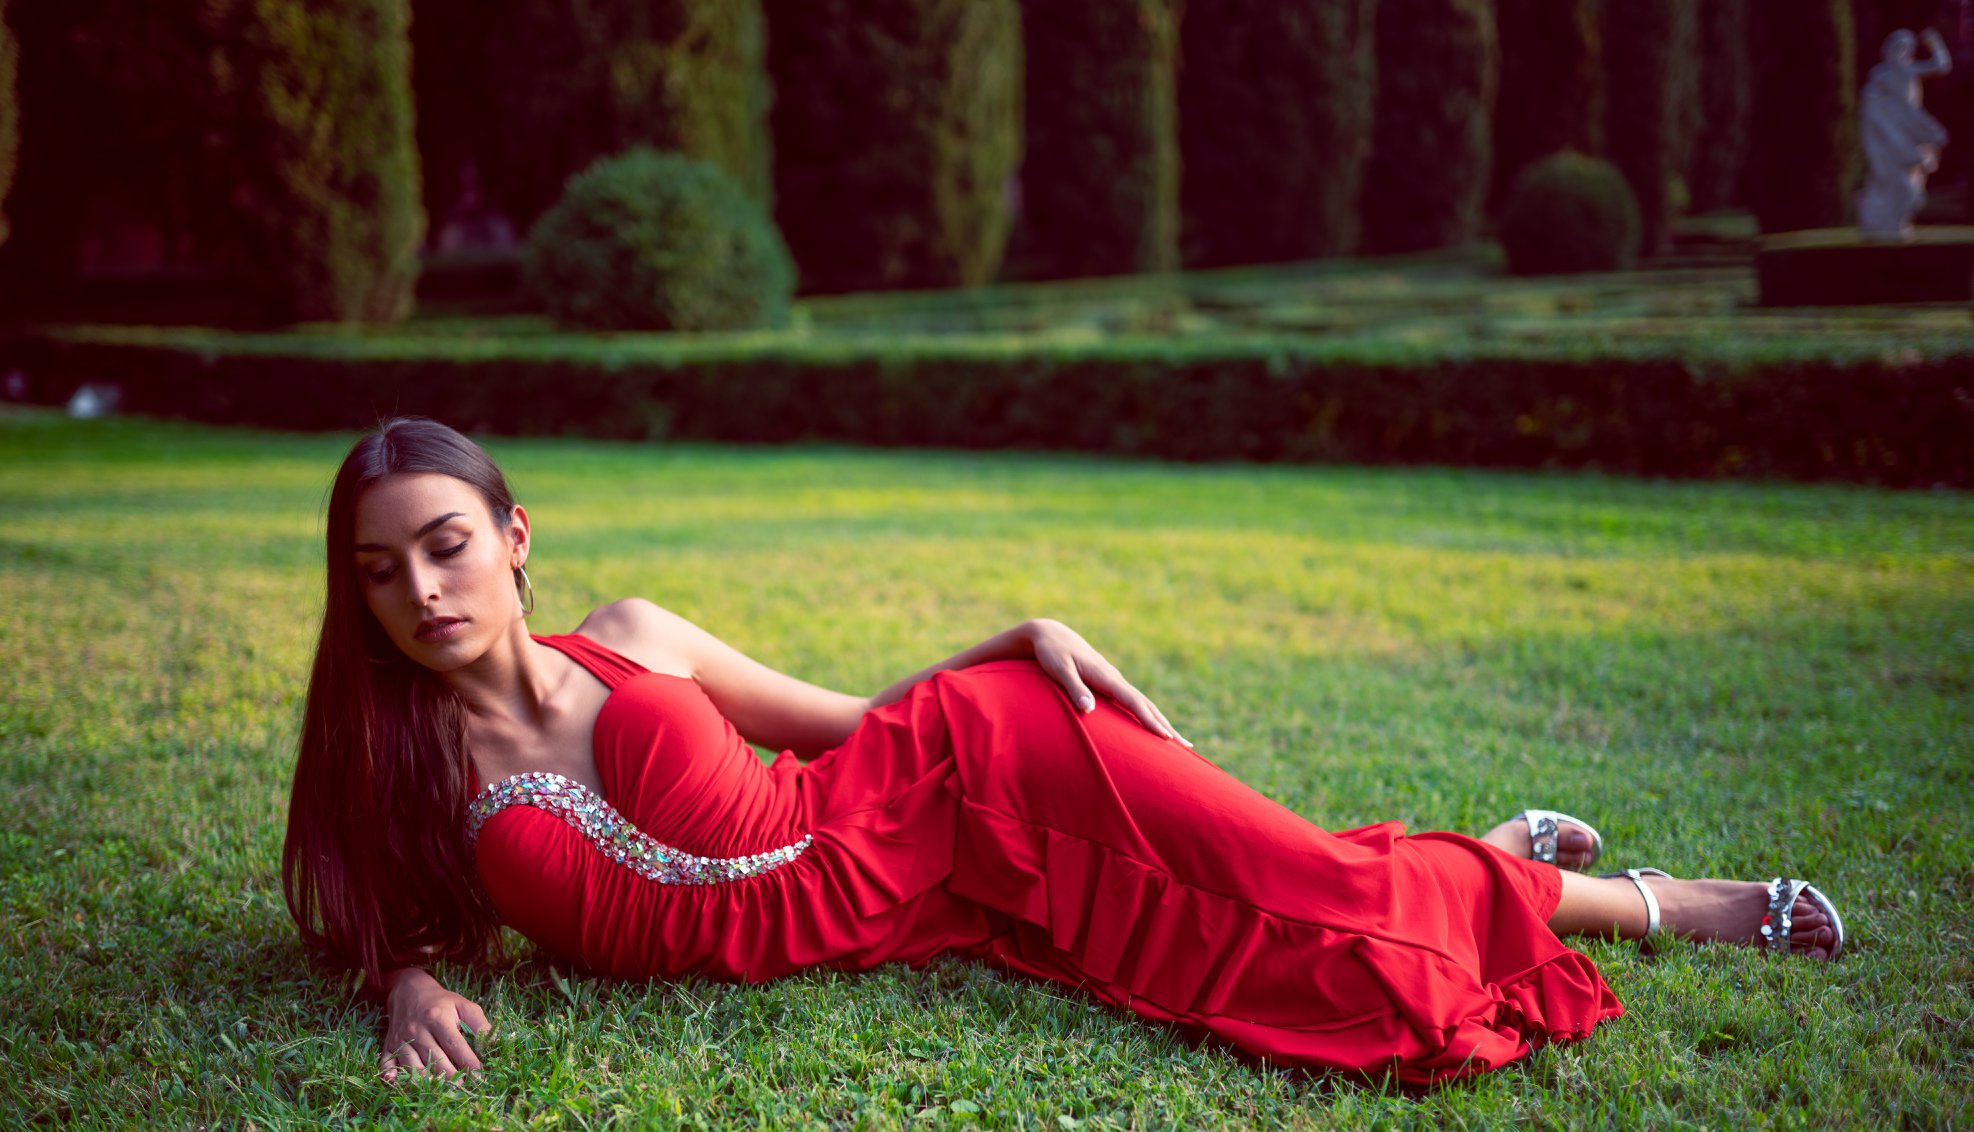 Women Model Women Outdoors Brunette Lying On Side Red Dress Dress Red Clothing Grass On The Ground O 1974x1132